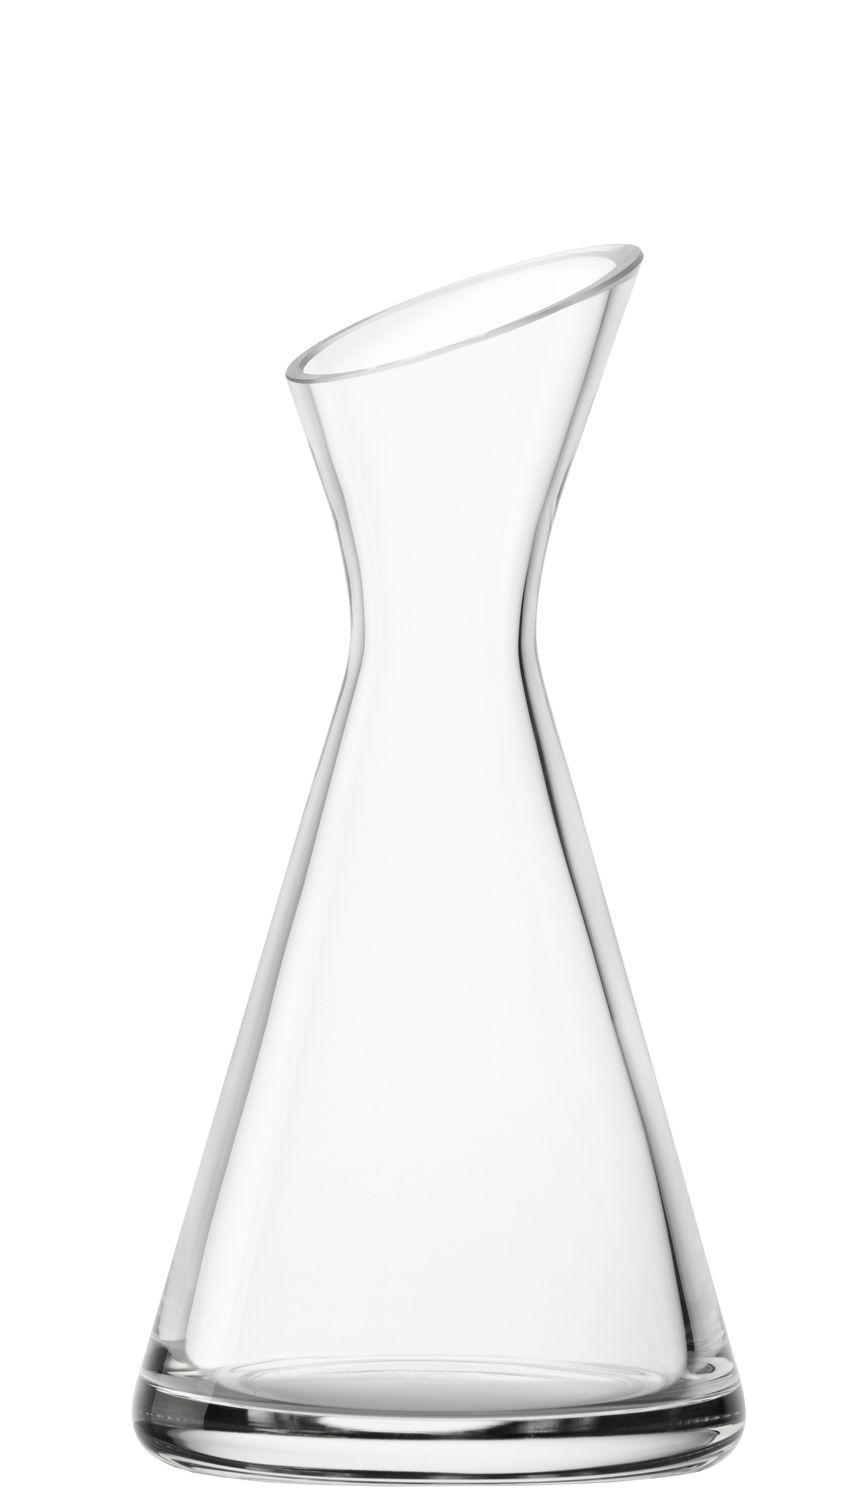 Caraffa, caraffa acqua, caraffa vetro, caraffa vino - One For All, 0,5 l